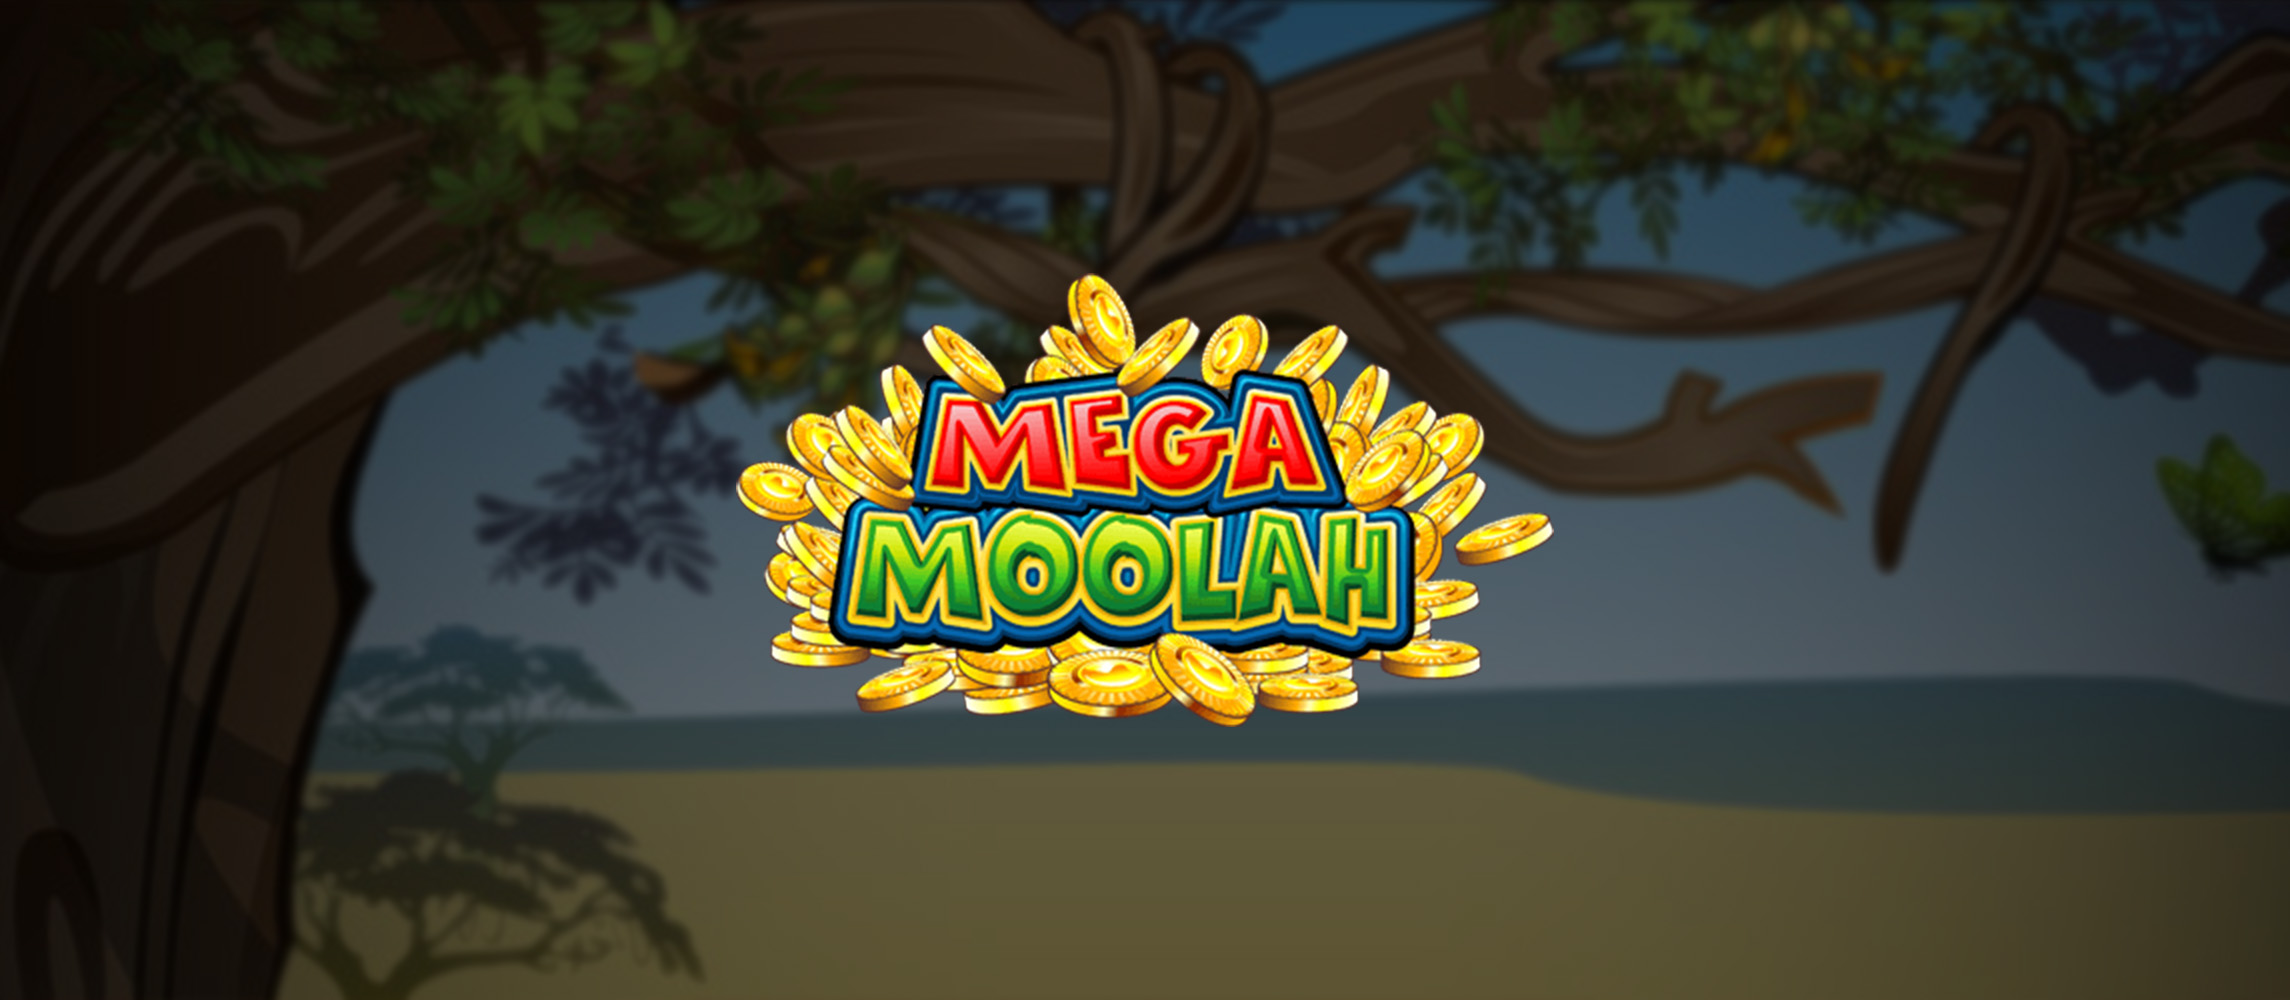 Mega Moolah offers high prizes and special features for online entertainment.